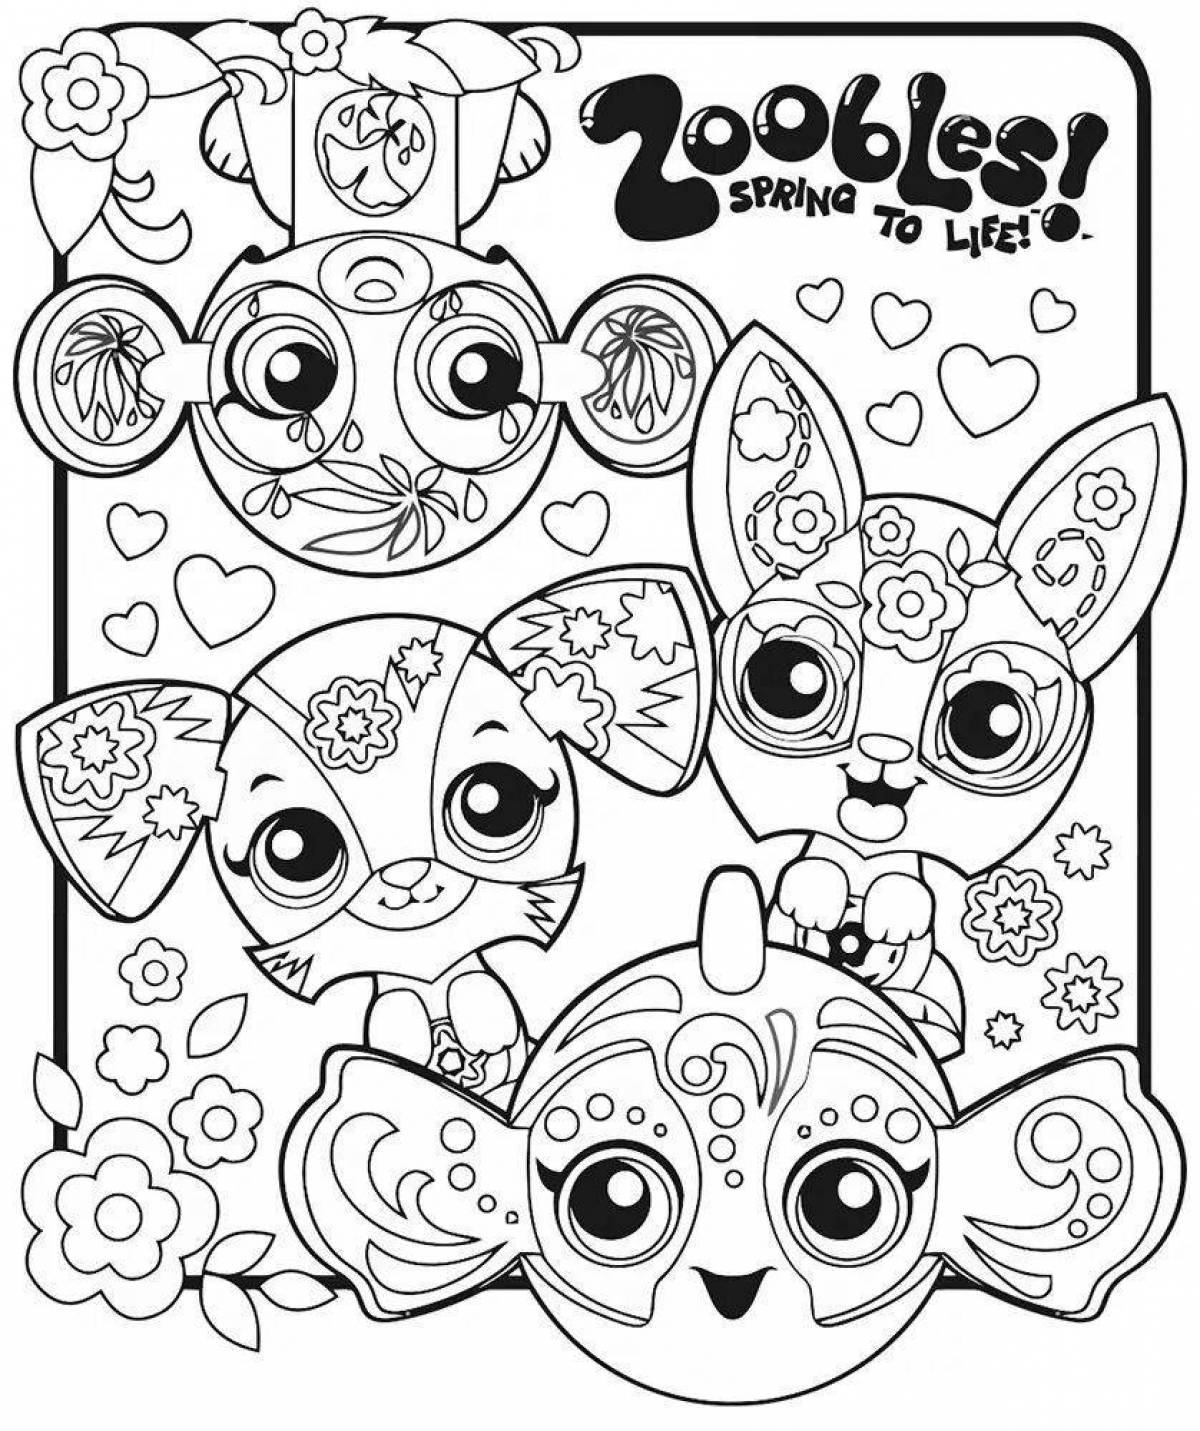 Little playful coloring book for girls